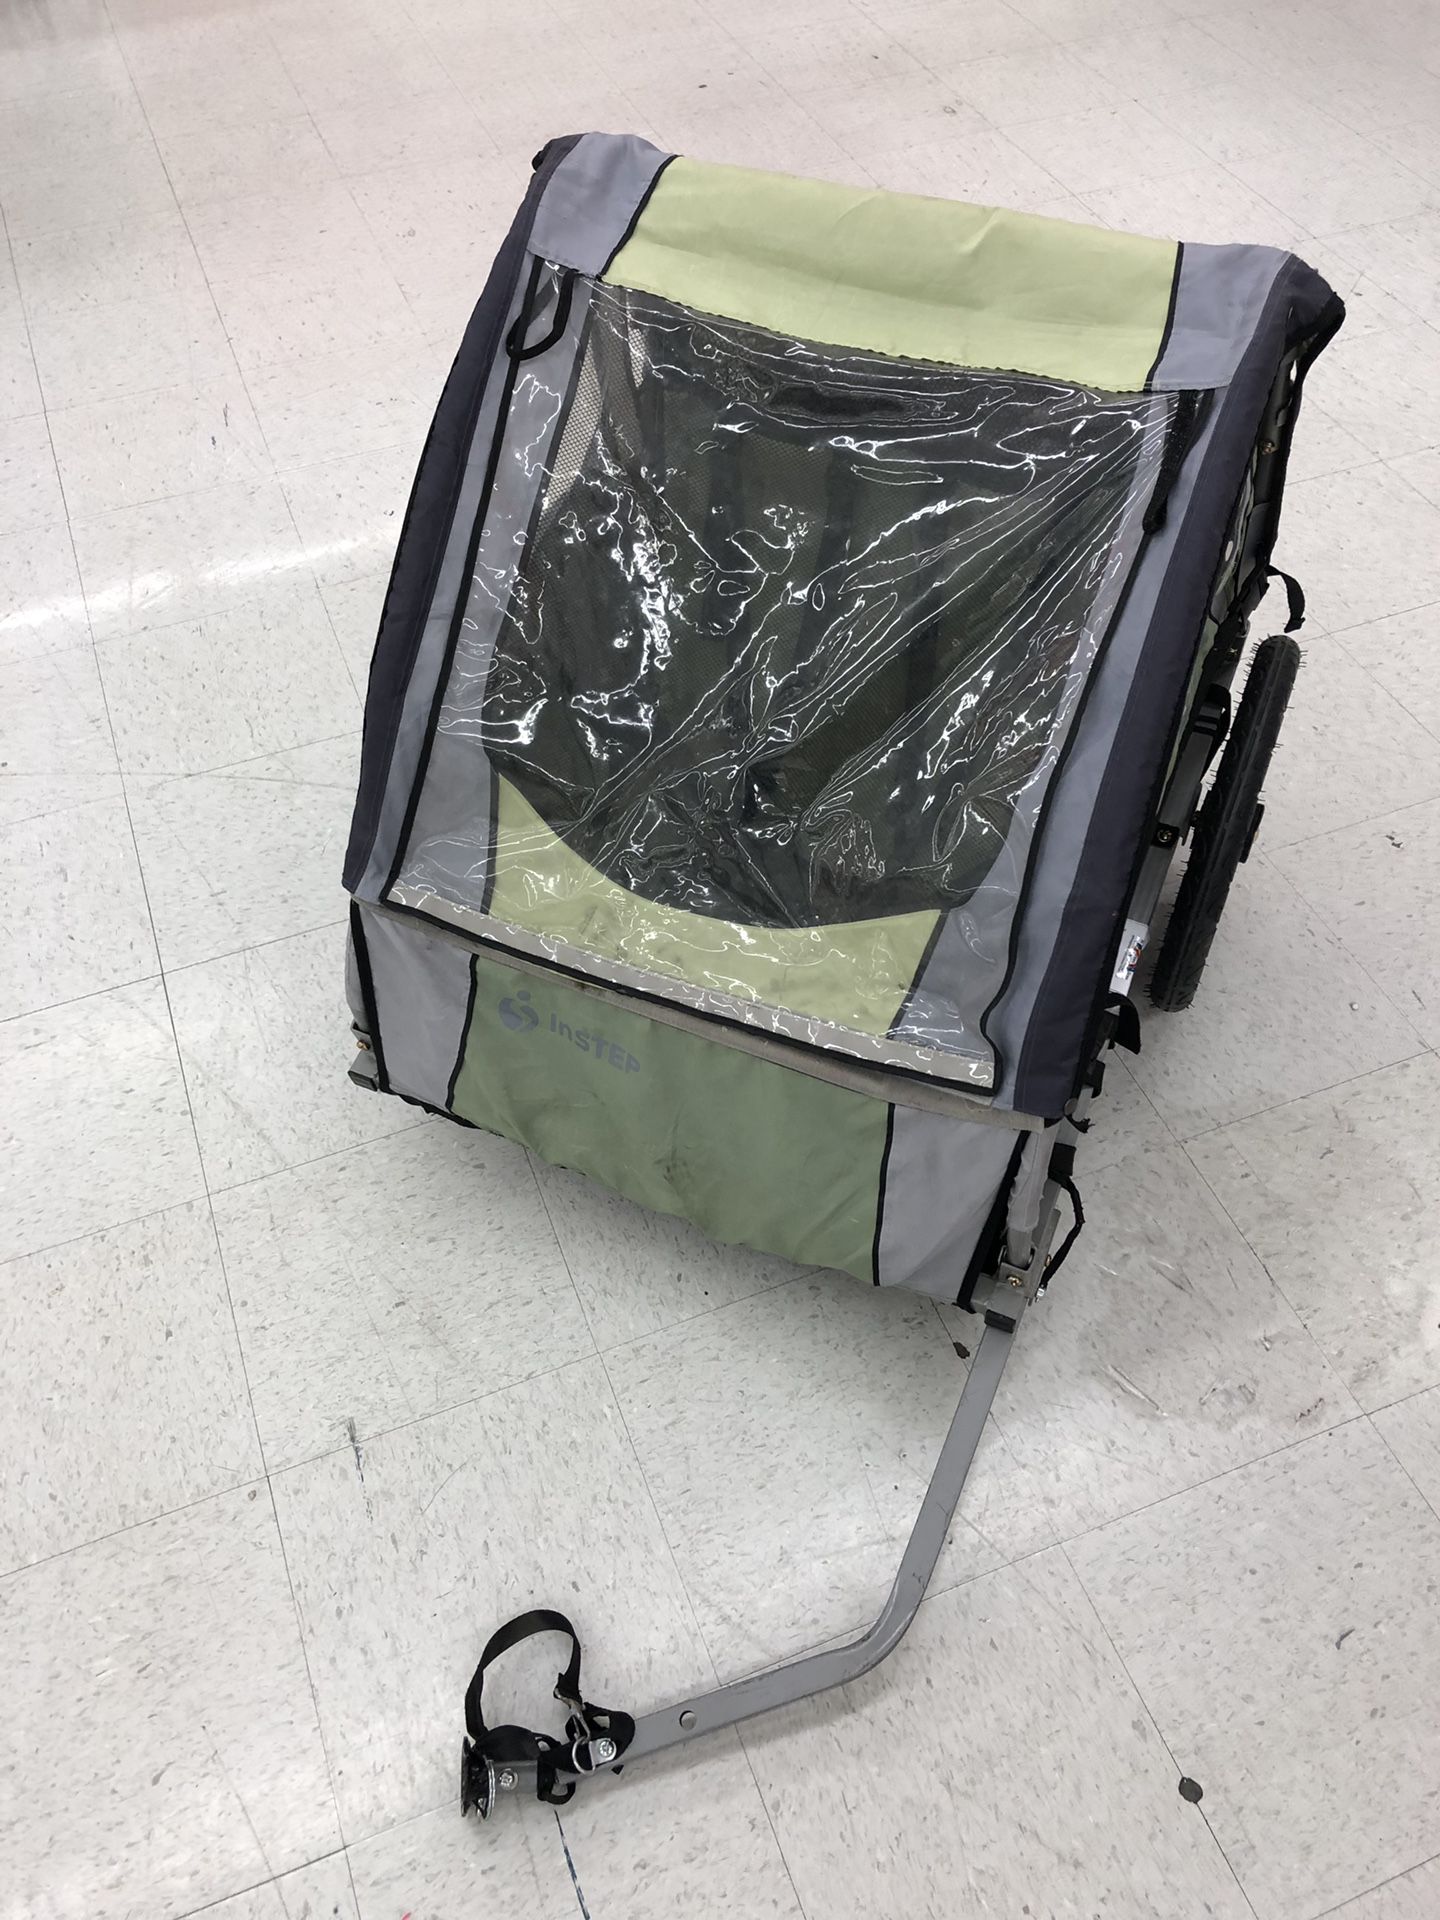 Instep green and gray bike trailer